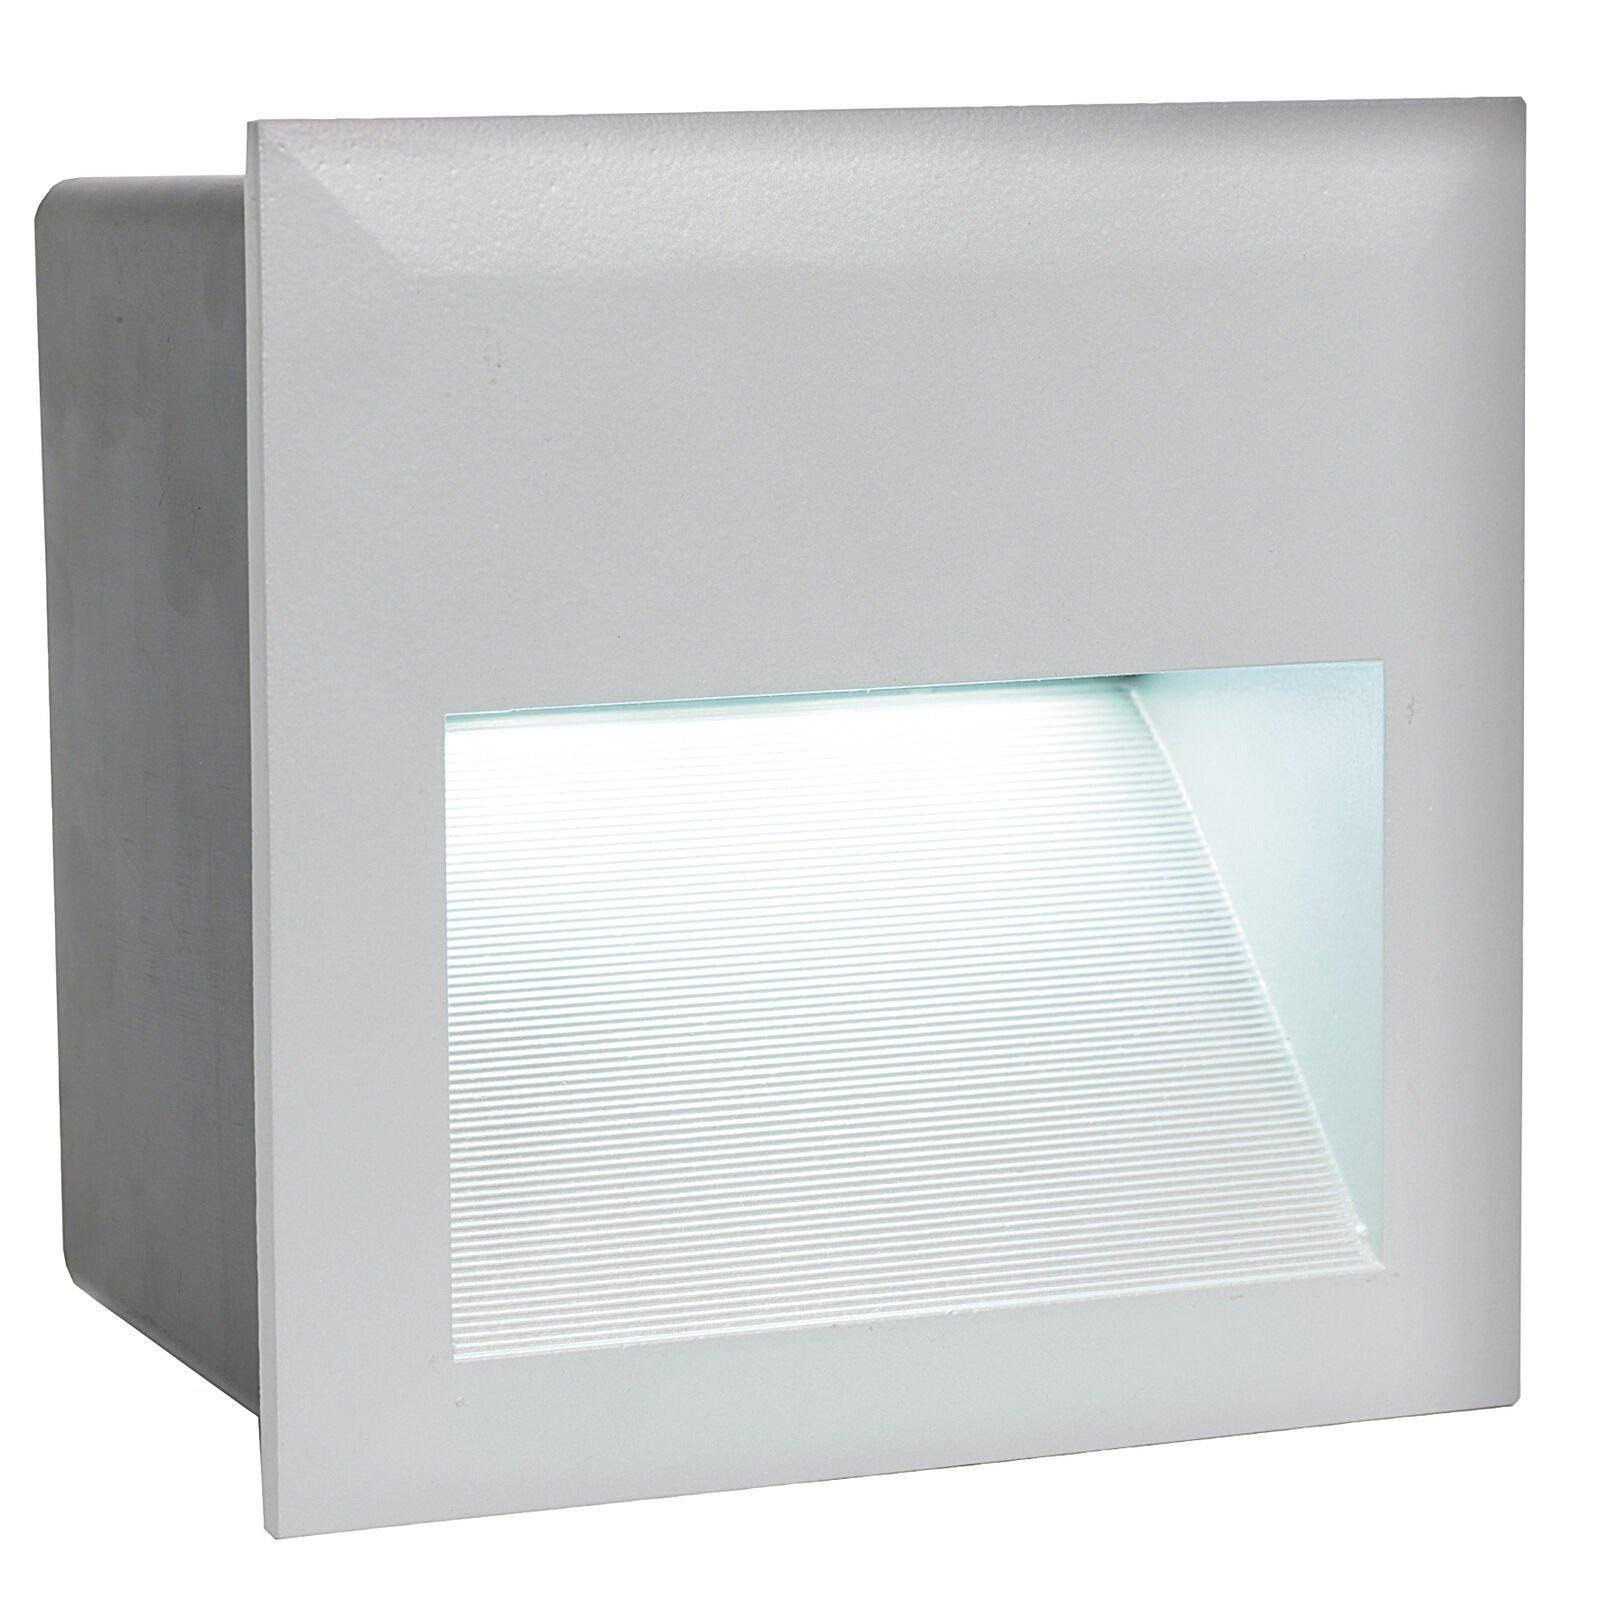 IP65 Recessed Outdoor Wall Light Silver Cast Aluminium 3.7W Built in LED - image 1